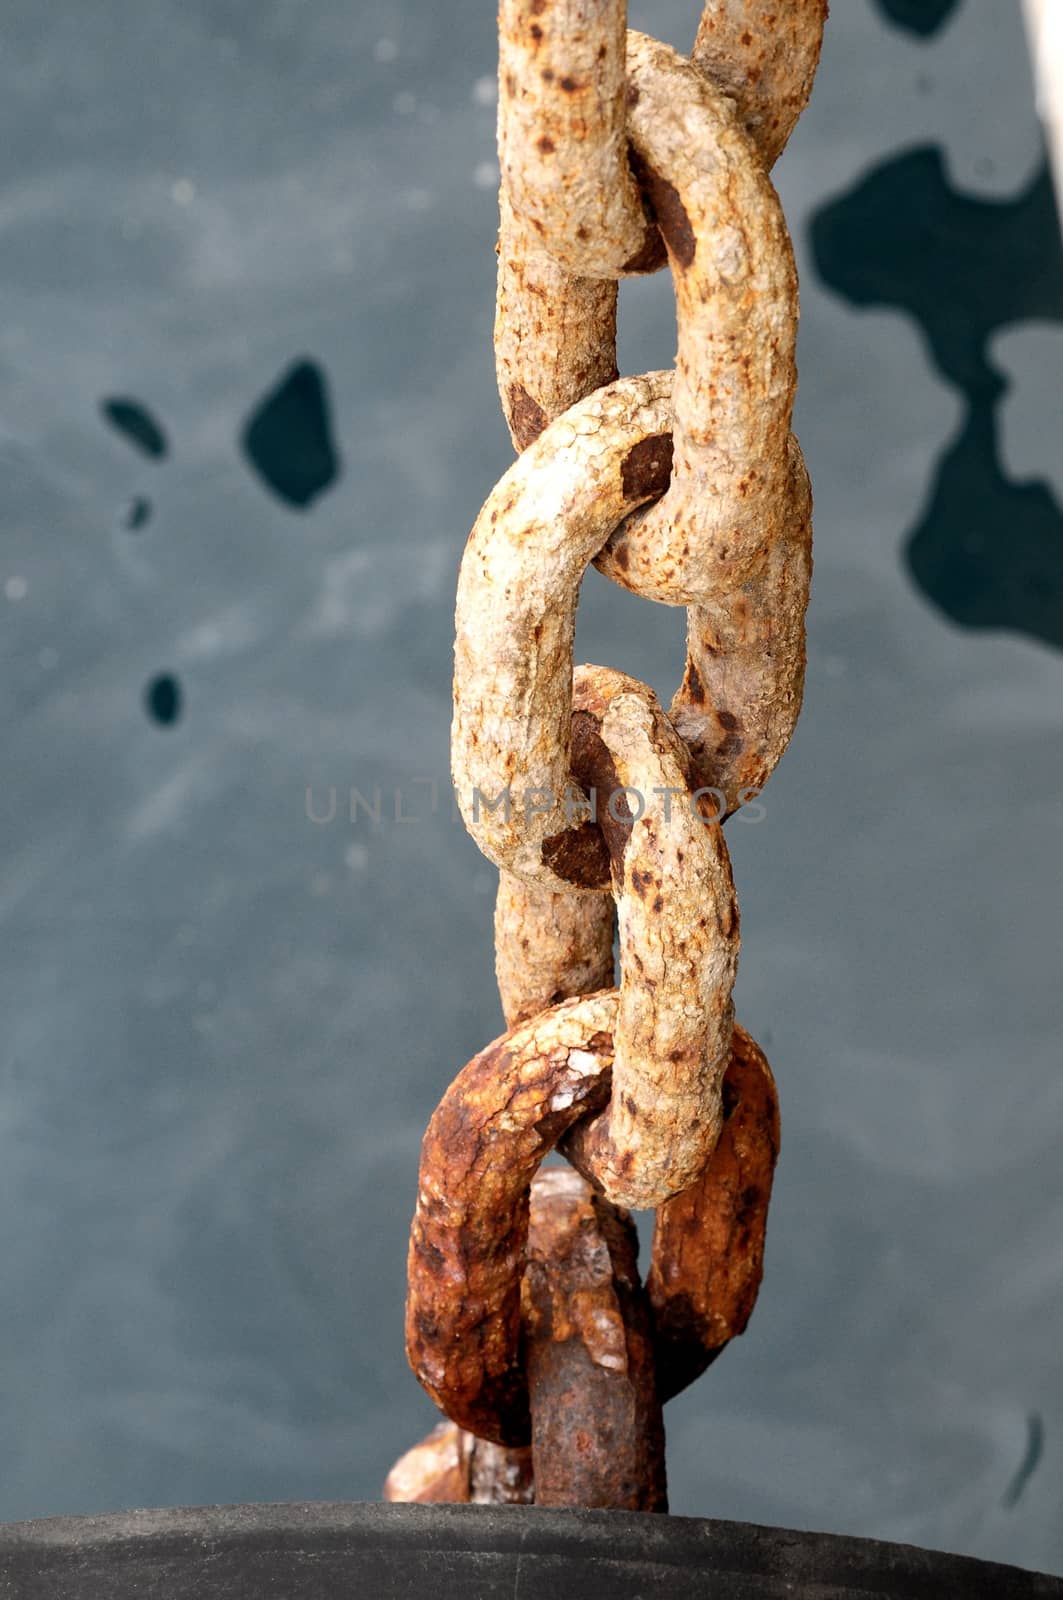 An Old Rusty Naval Chain by underworld